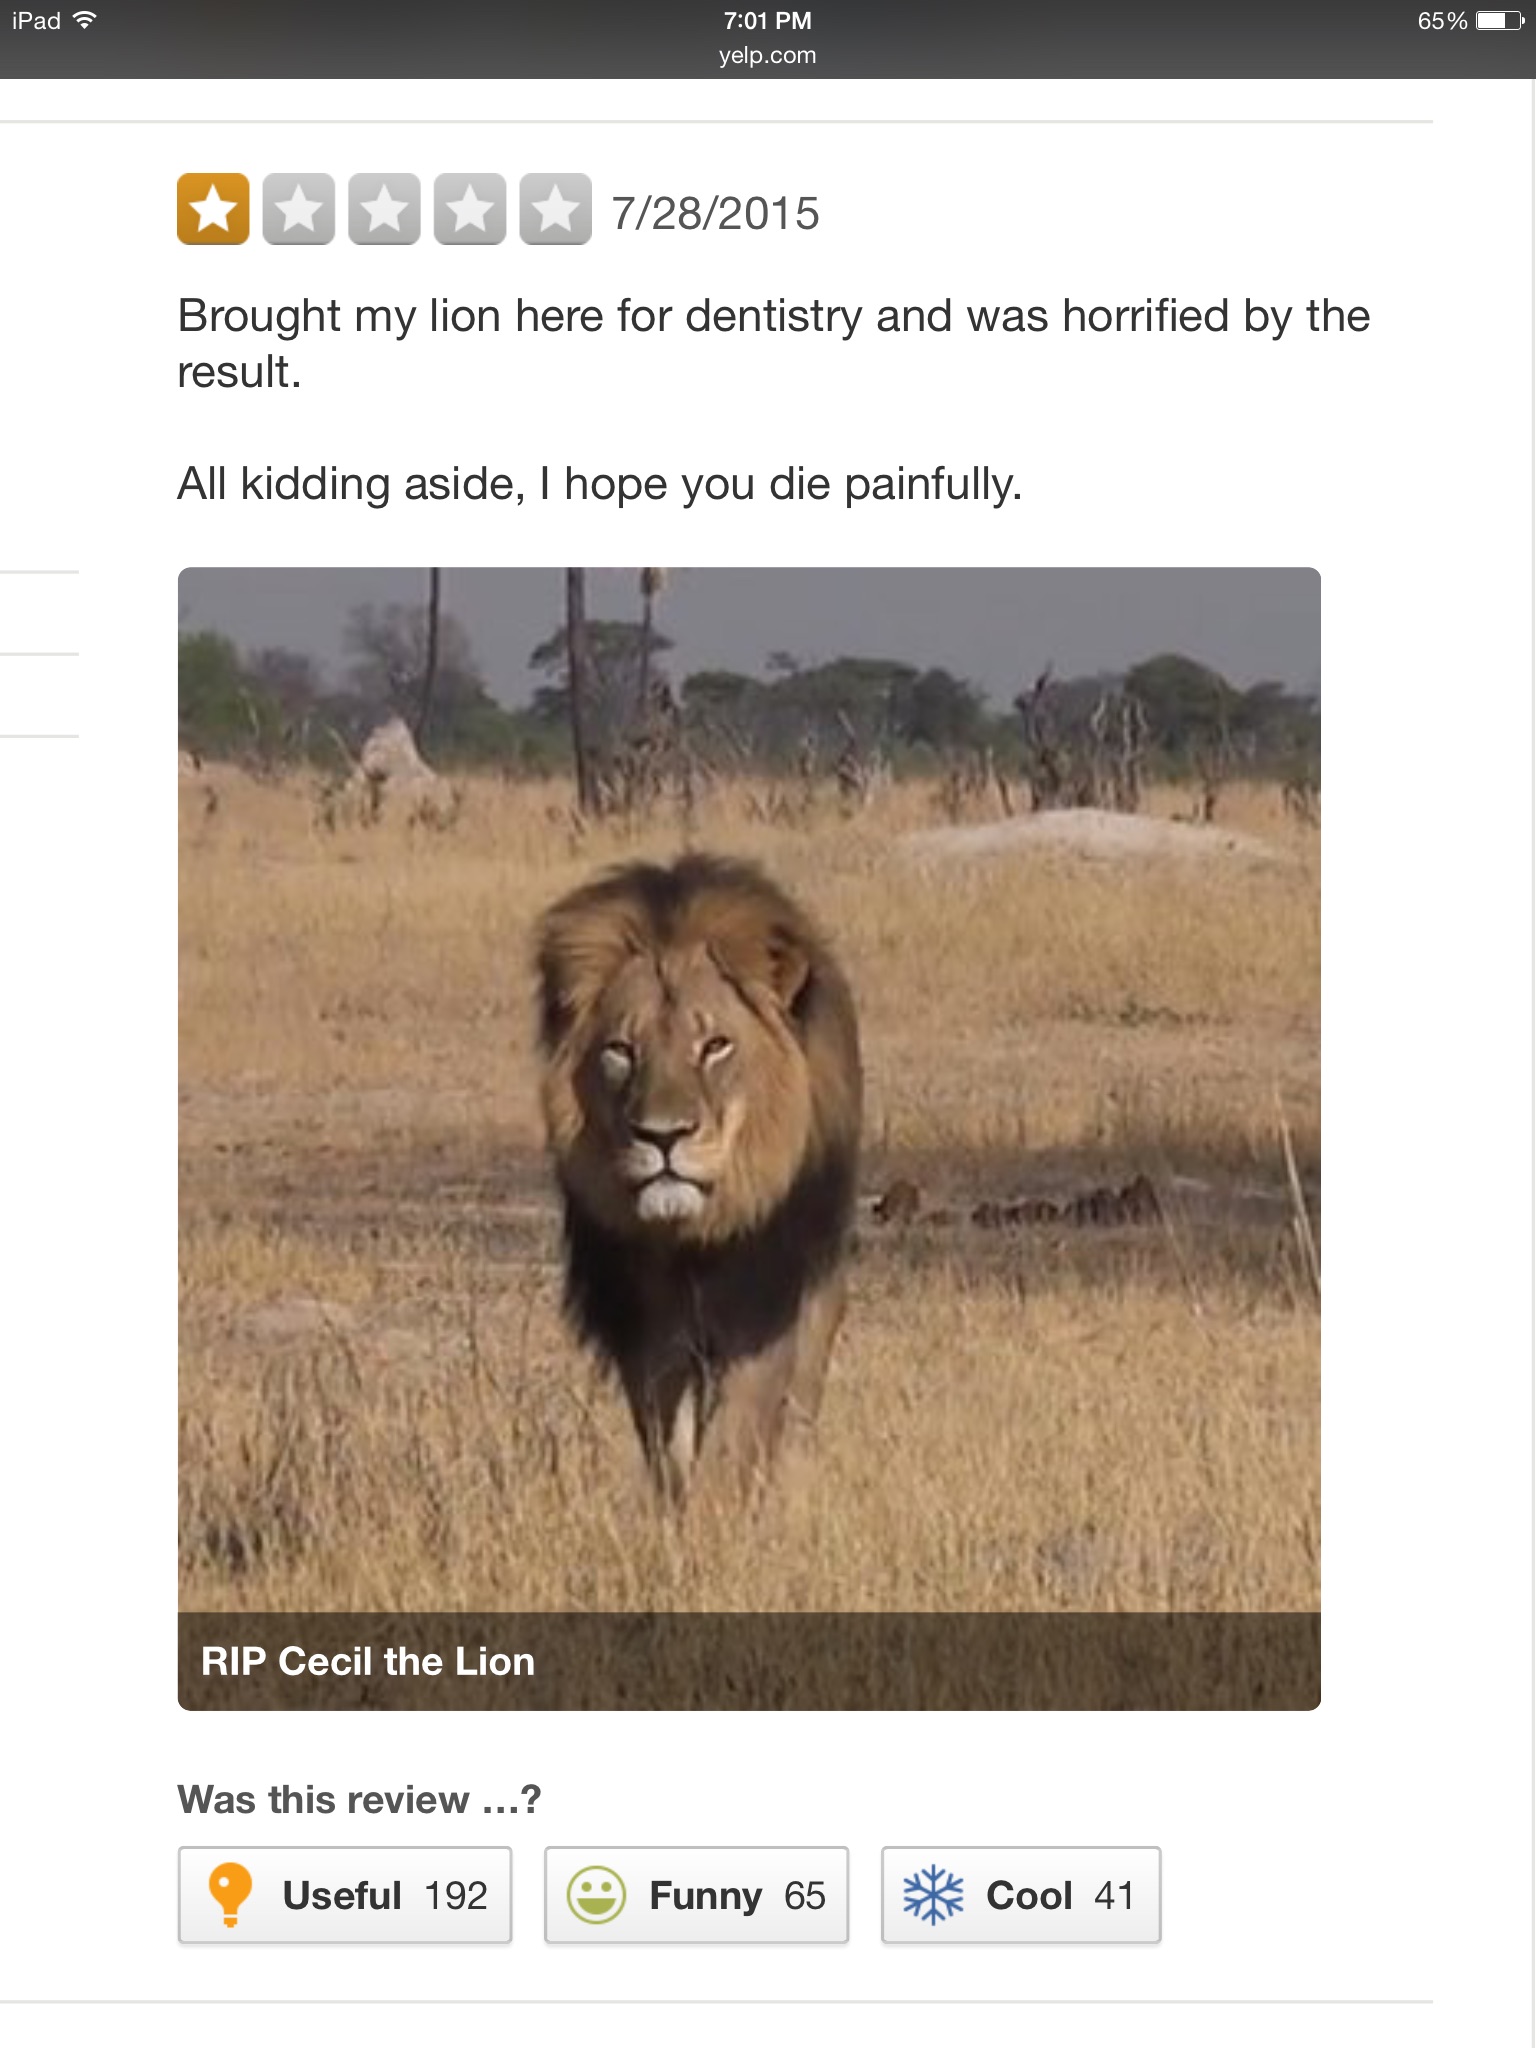 walter palmer dentist - iPad 65% 0 yelp.com Q 7 282015 Brought my lion here for dentistry and was horrified by the result. All kidding aside, I hope you die painfully. Rip Cecil the Lion Was this review ...? Useful 192 Funny 65 Cool 41